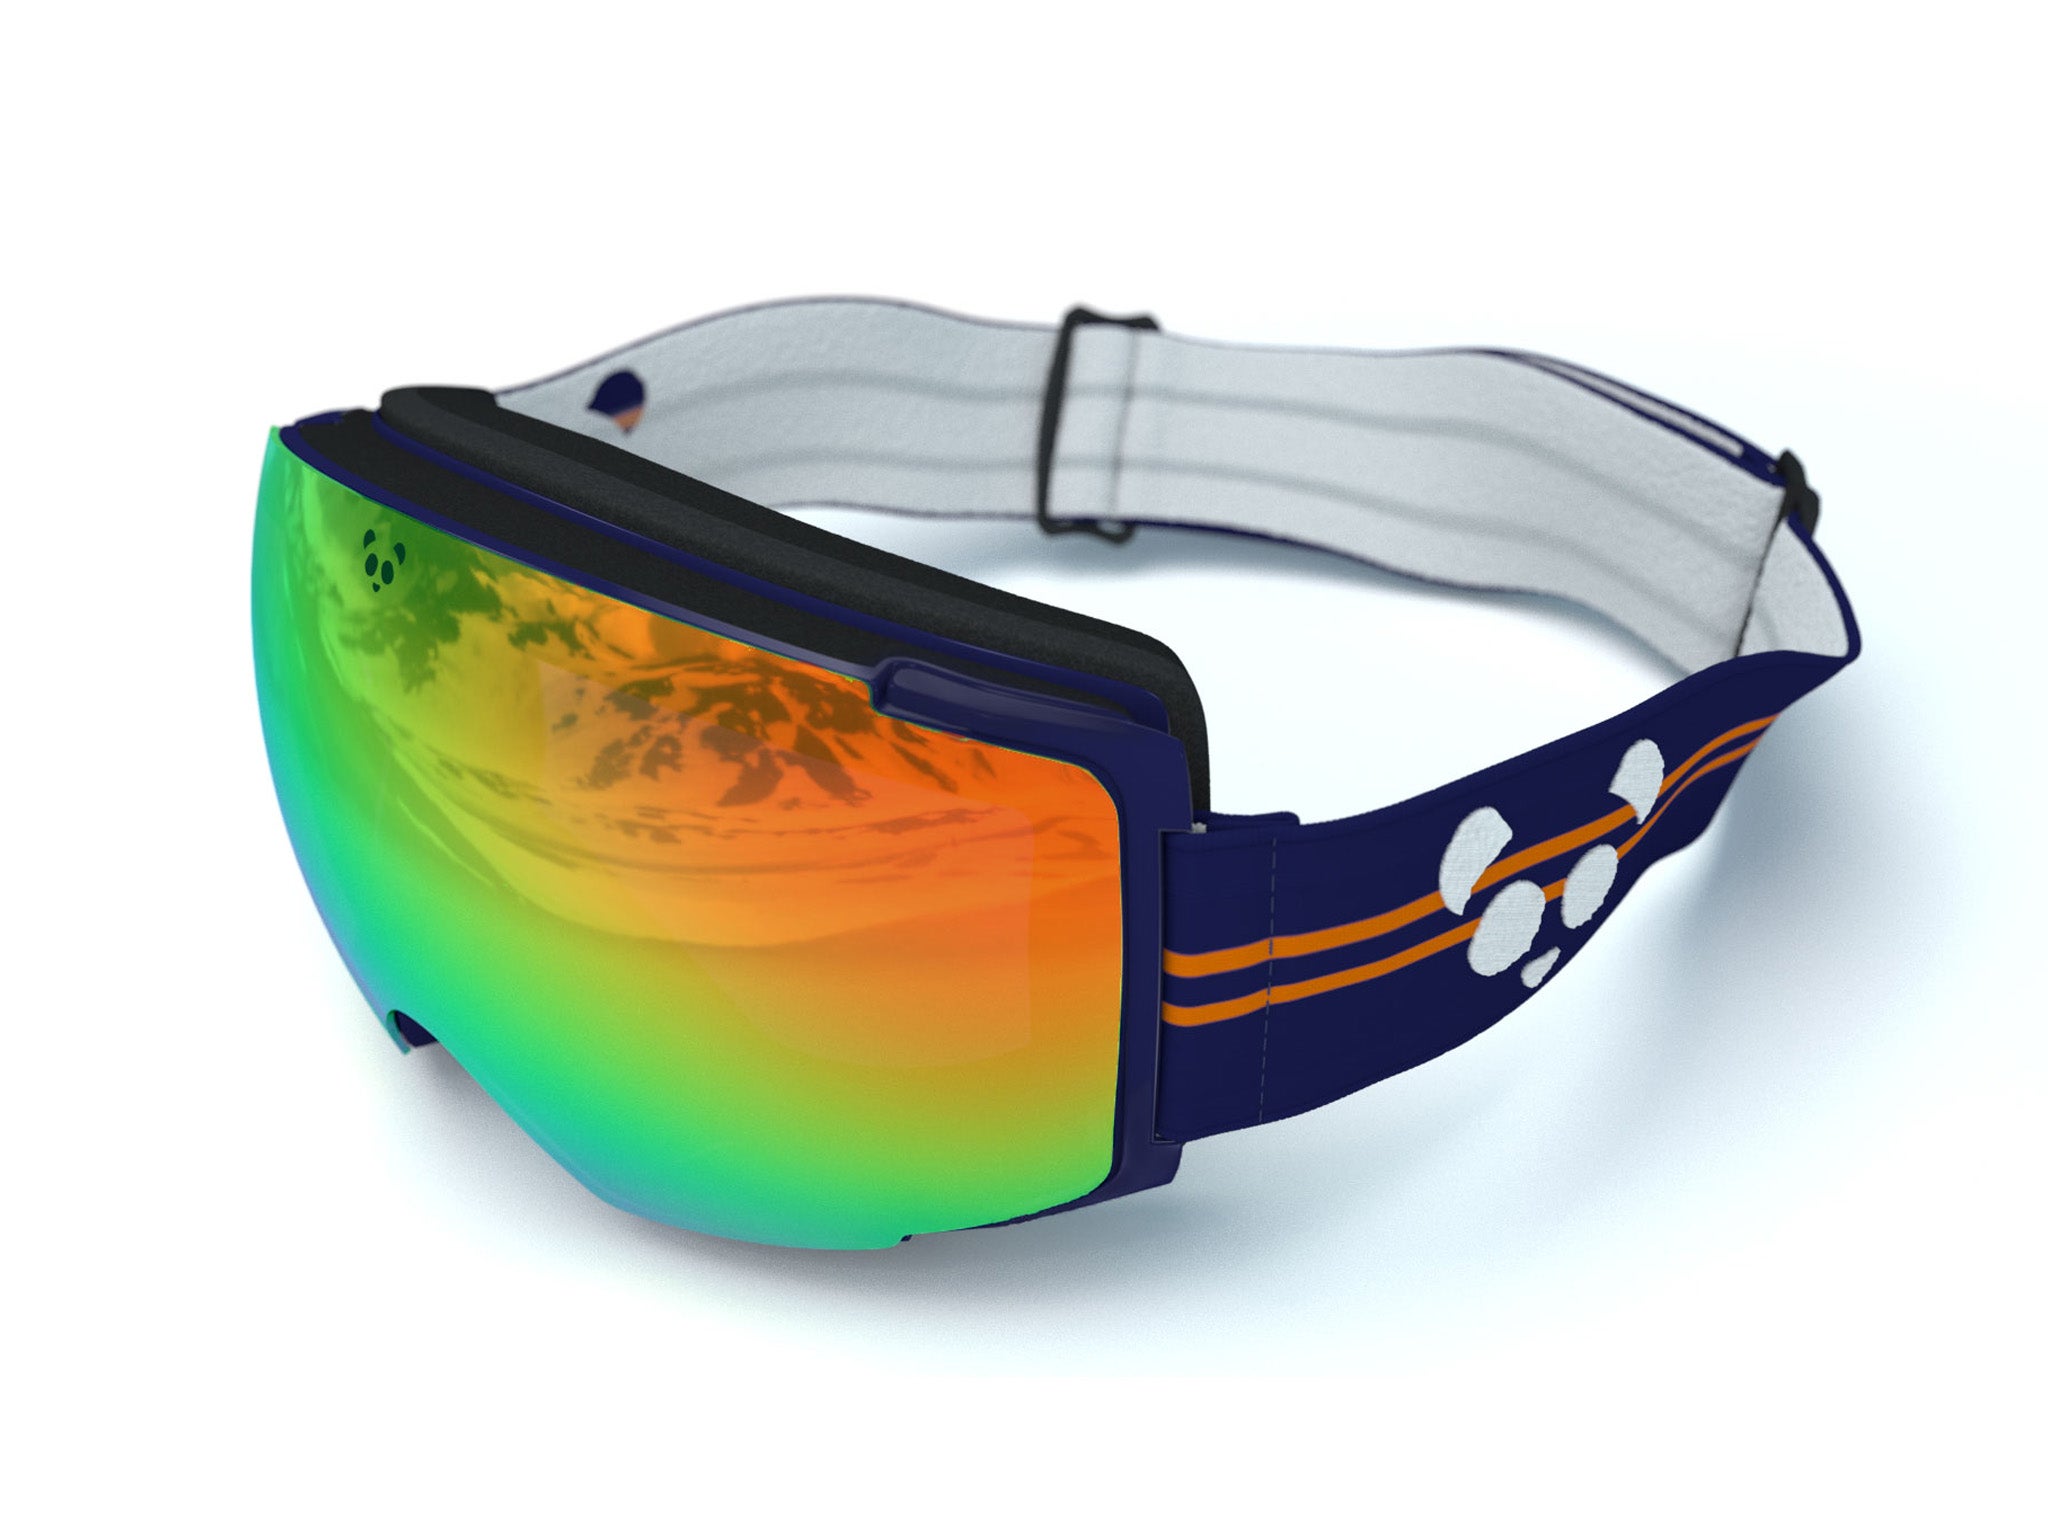 Panda-indybest-goggles-review